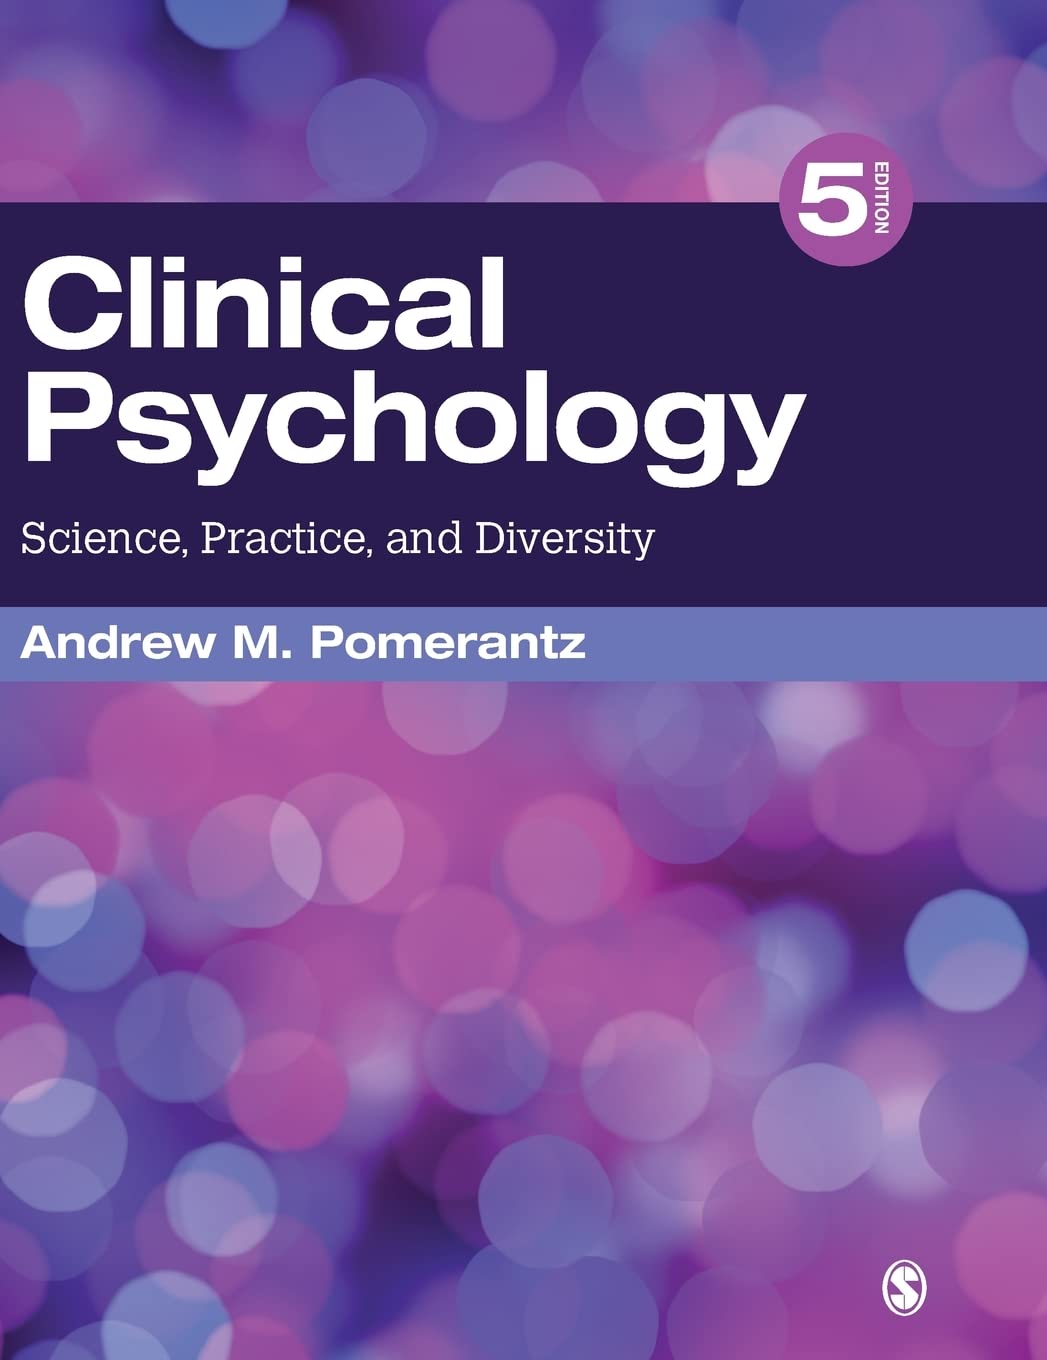 Cover Image: for the complete test bank accompanying Clinical Psychology by Pomerantz